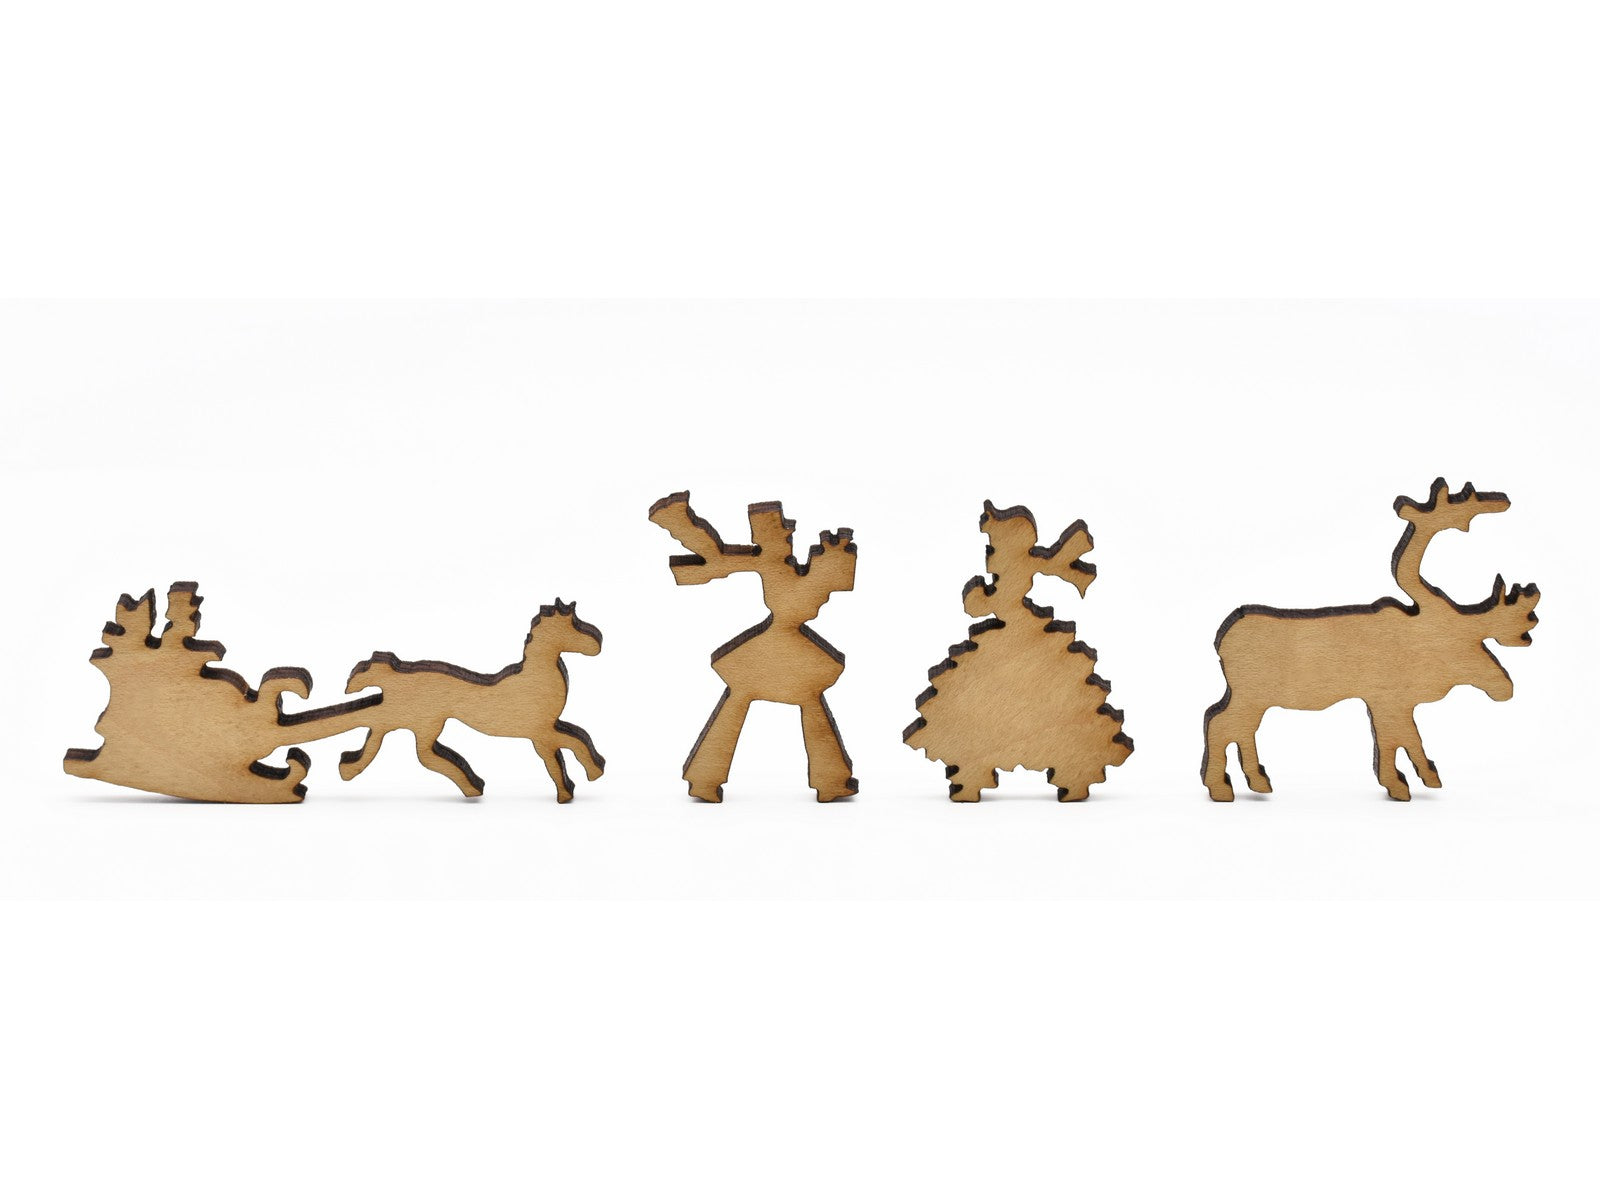 A closeup of pieces in the shape of a sleigh, a couple, and a reindeer.